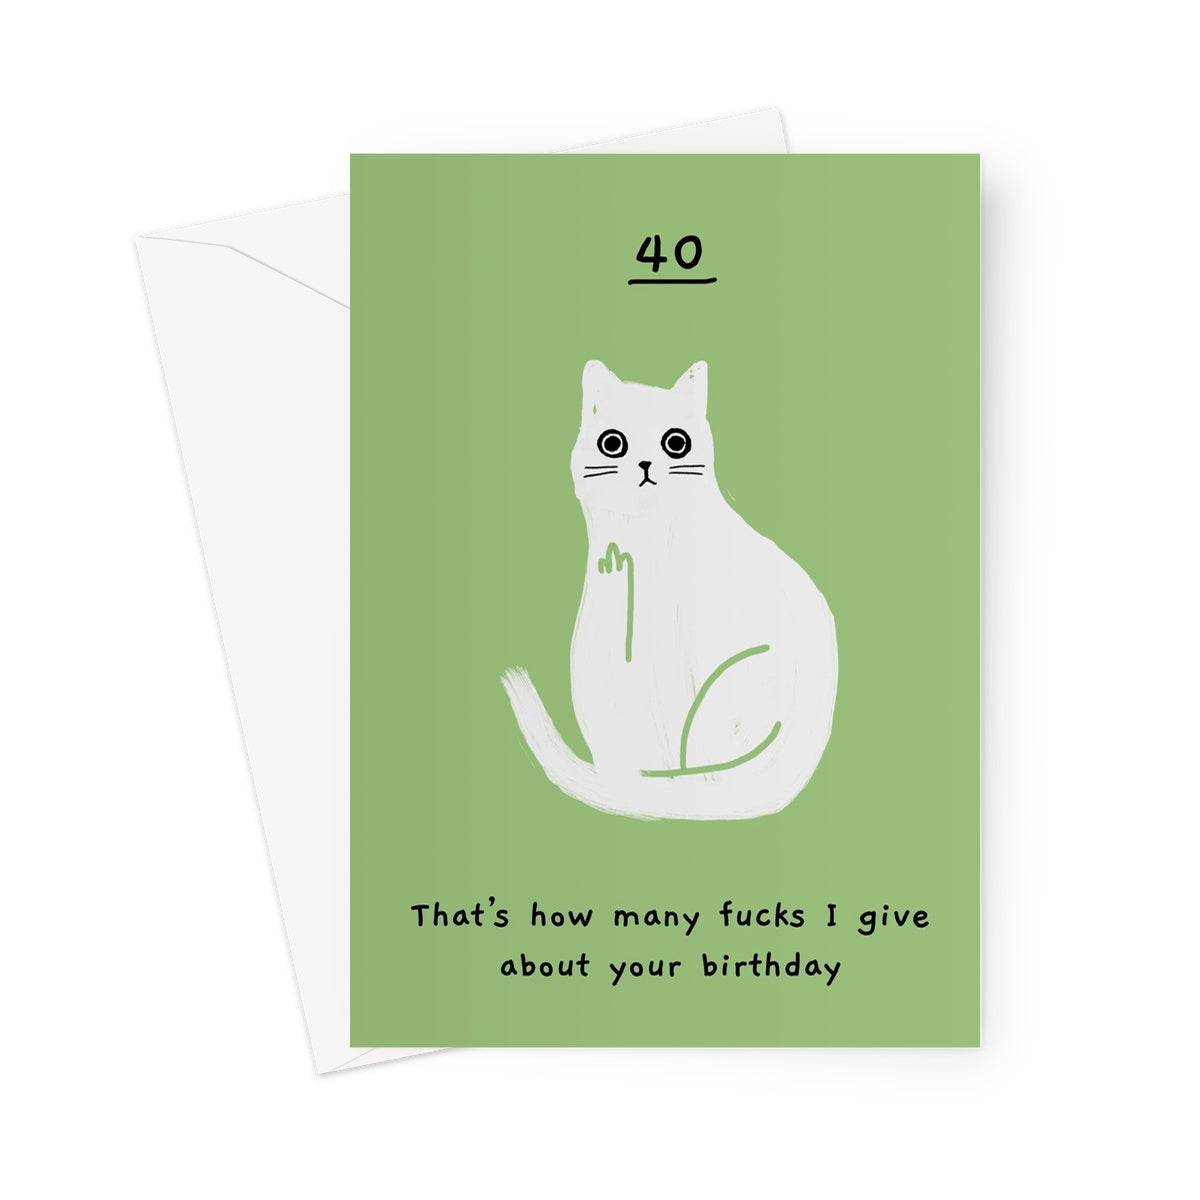 Ken the cat 40th birthday card - that's how many f*cks I give in green